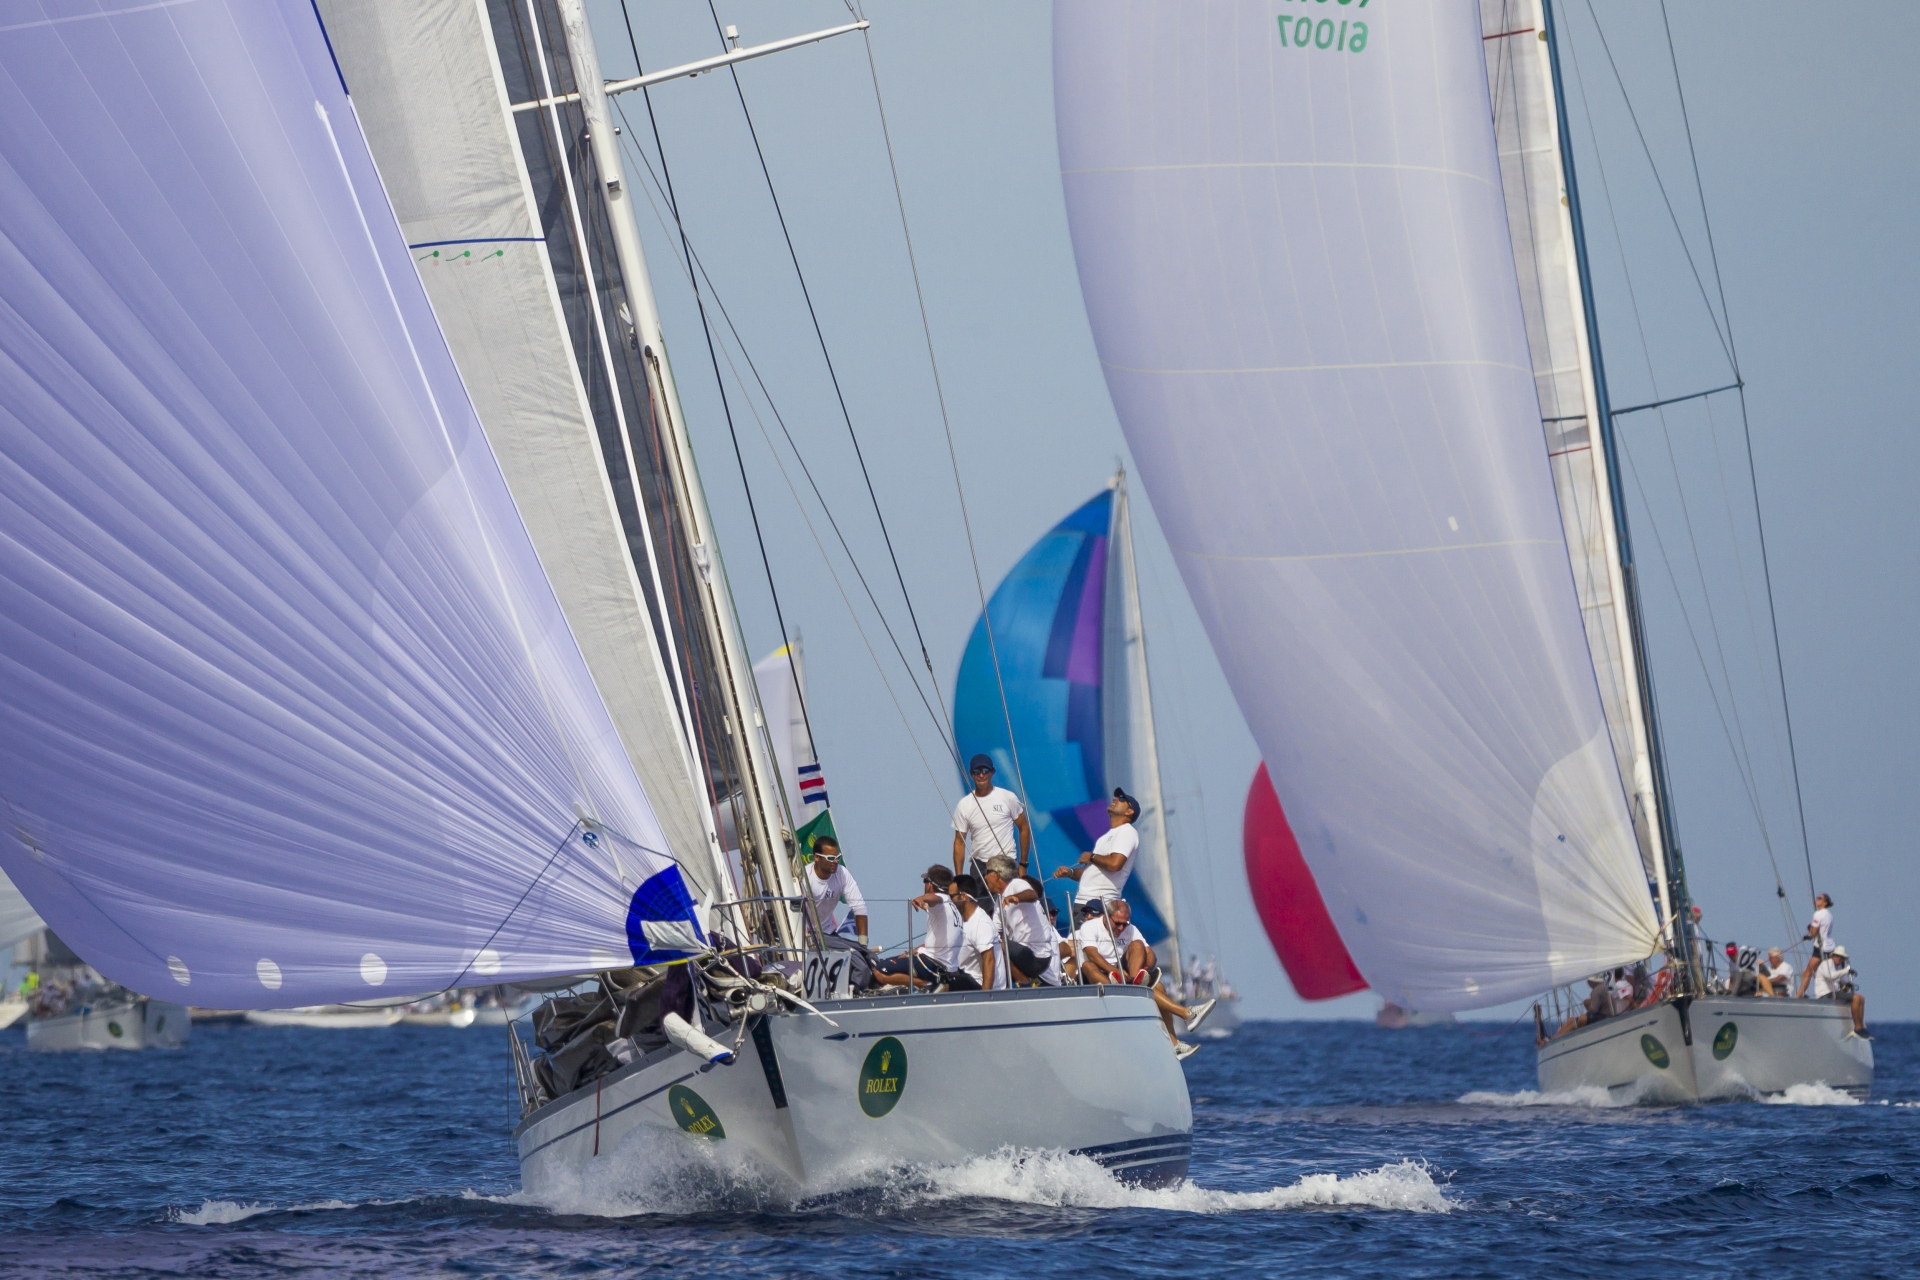 Rolex Swan Cup, more than 90 boats at 21st edition - Press Release - Yacht Club Costa Smeralda